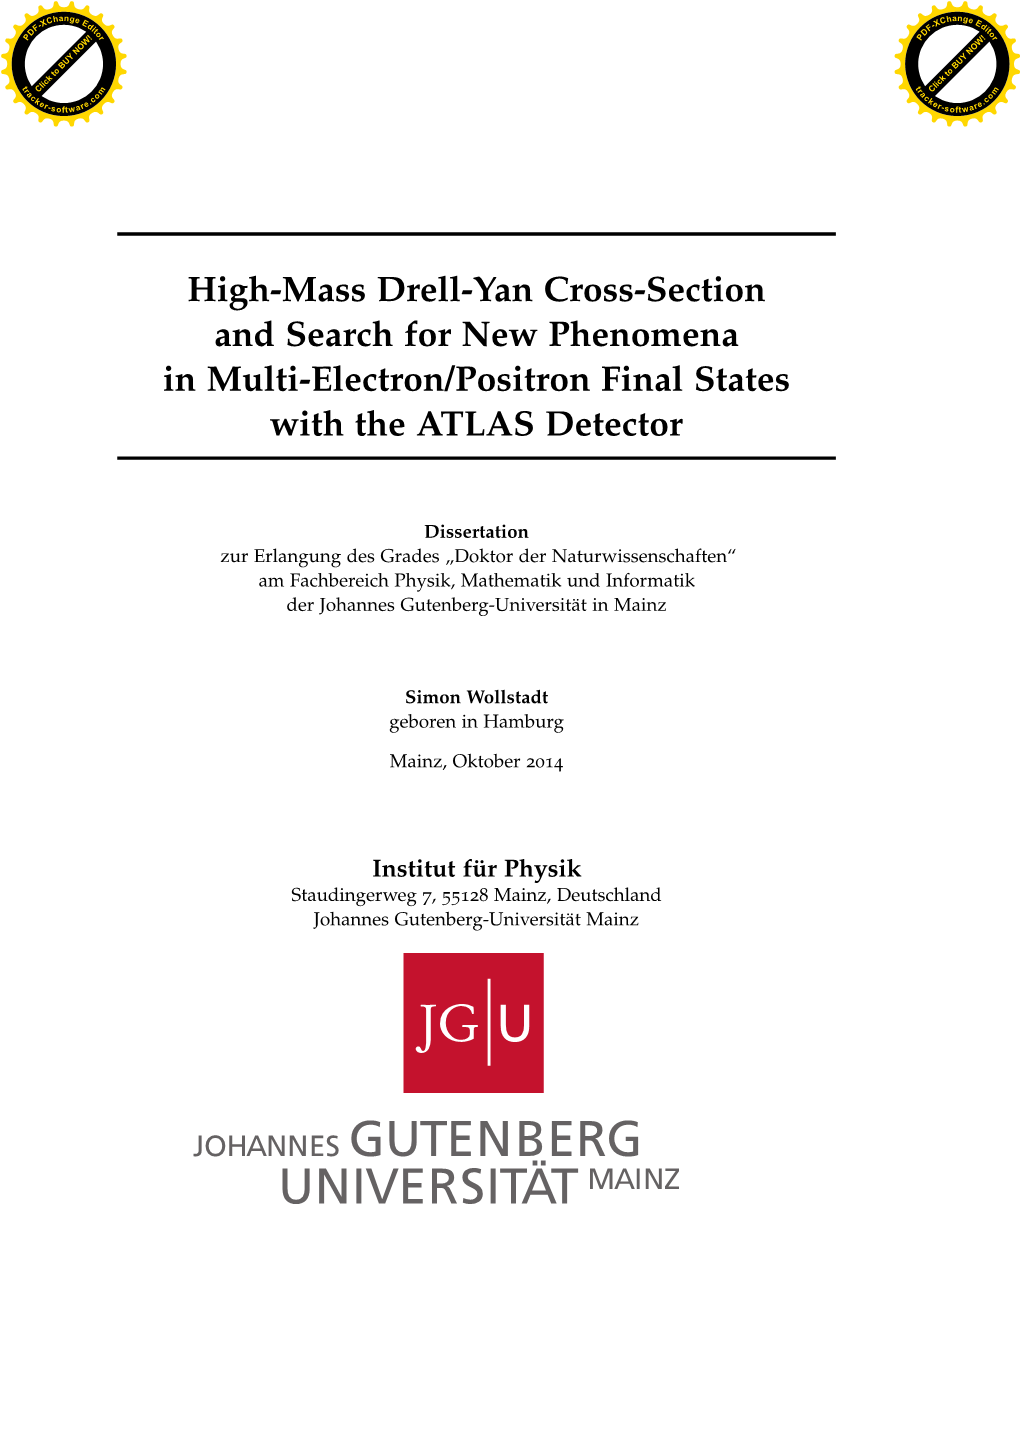 High-Mass Drell-Yan Cross-Section and Search for New Phenomena in Multi-Electron/Positron Final States with the ATLAS Detector